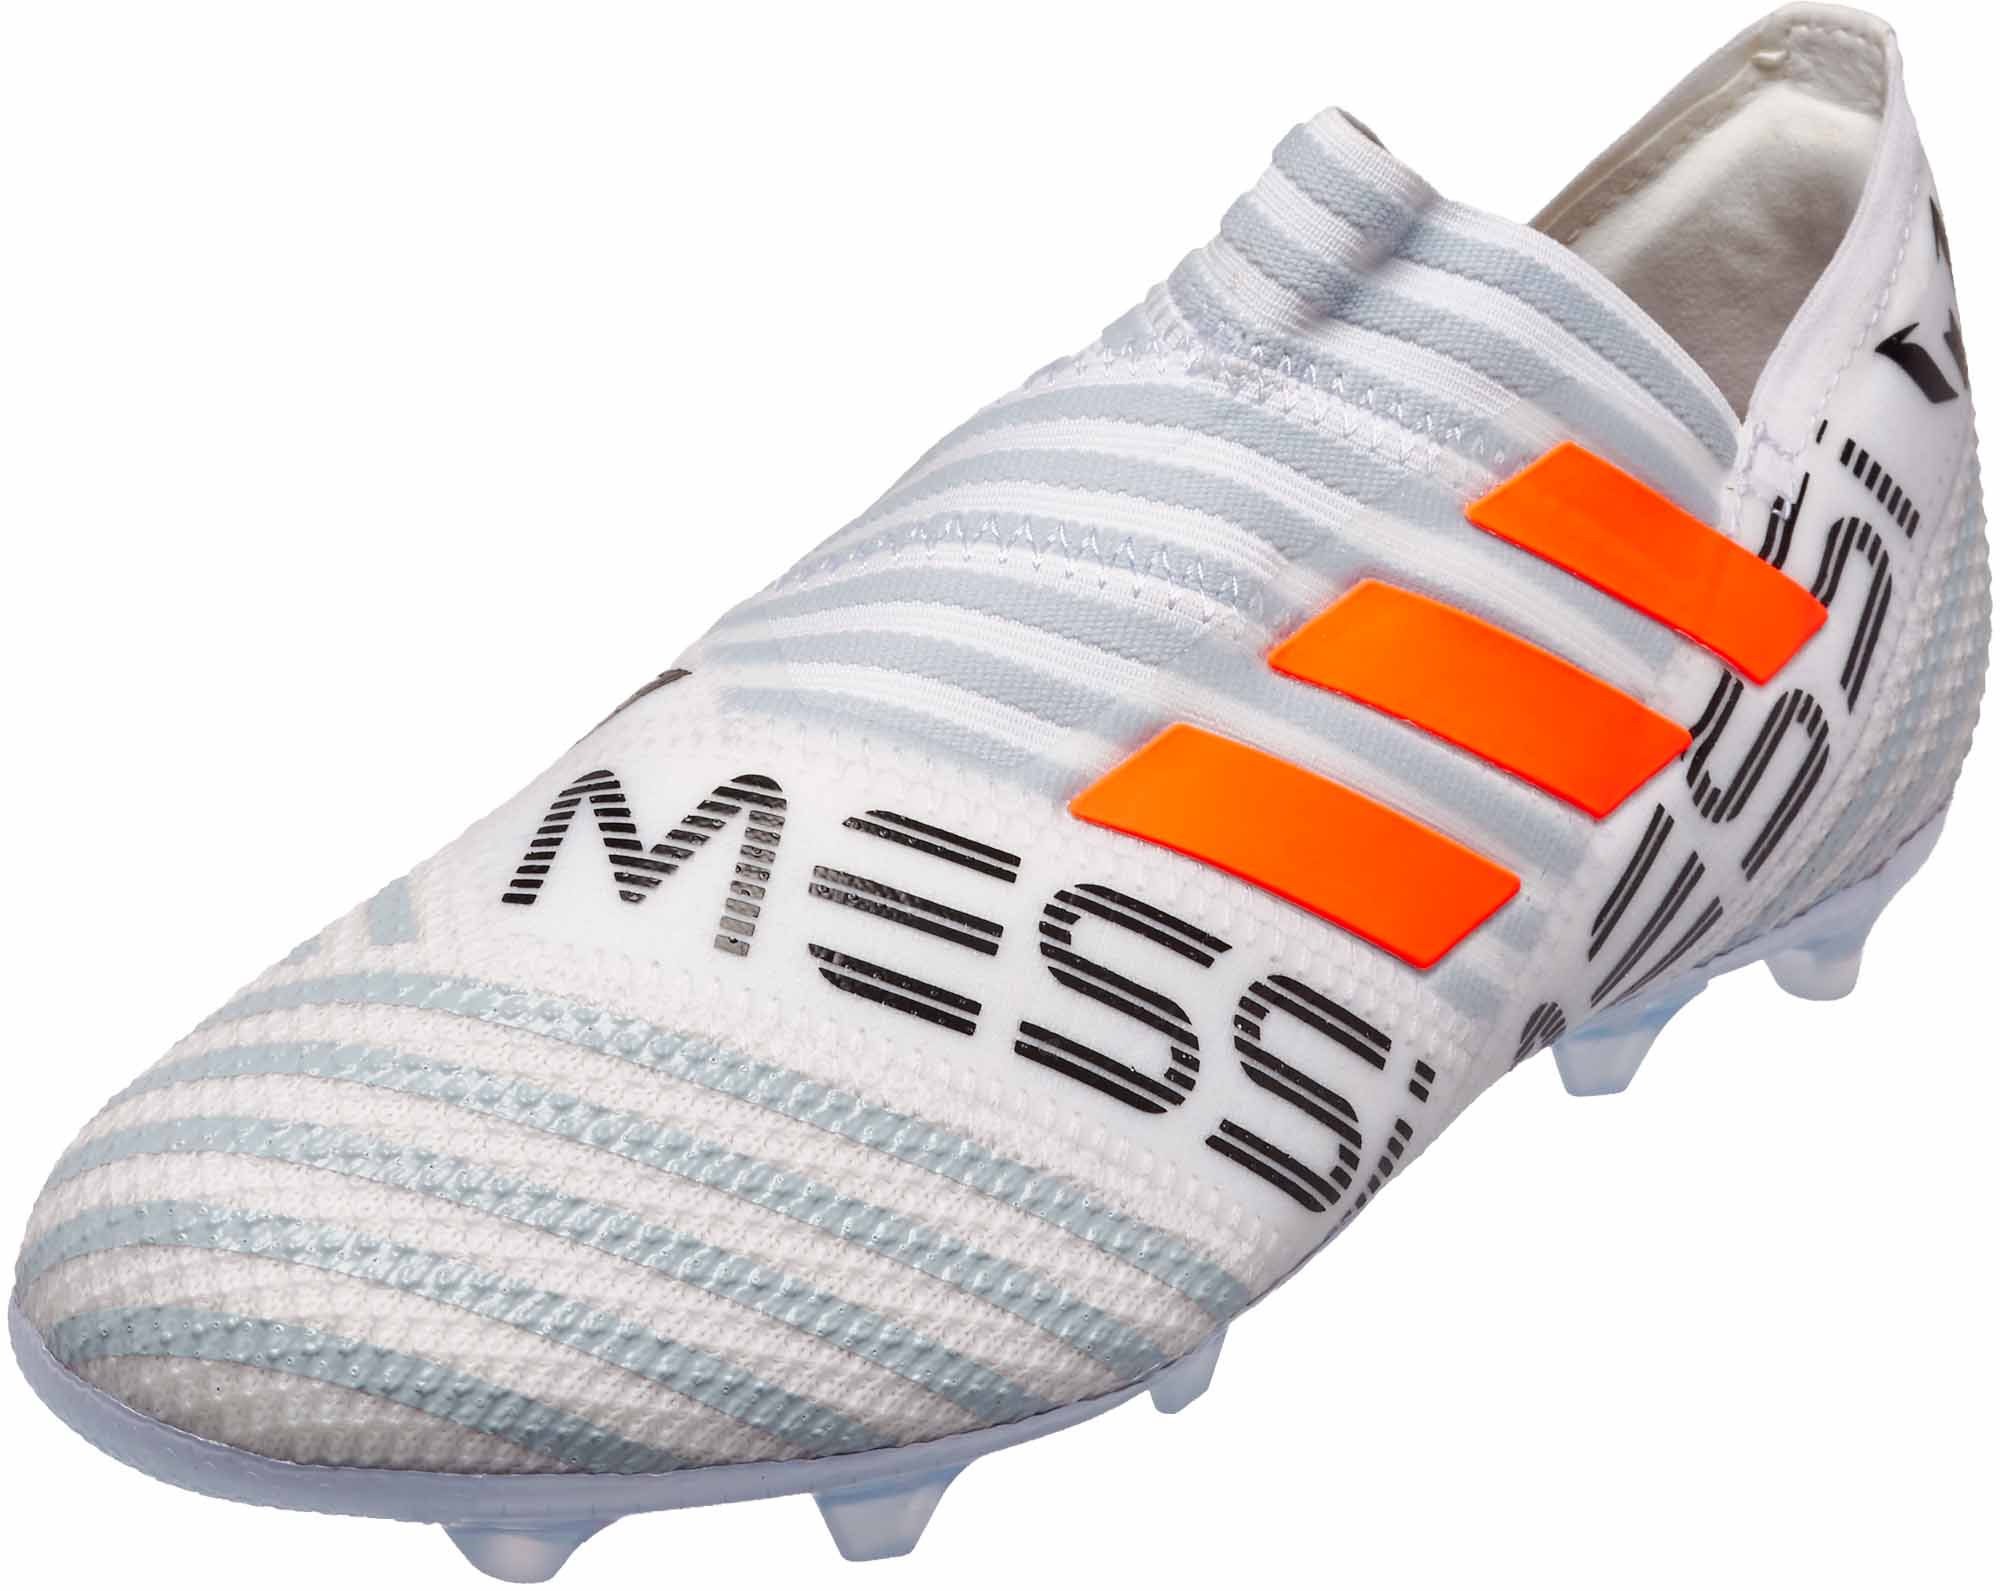 boys messi soccer cleats